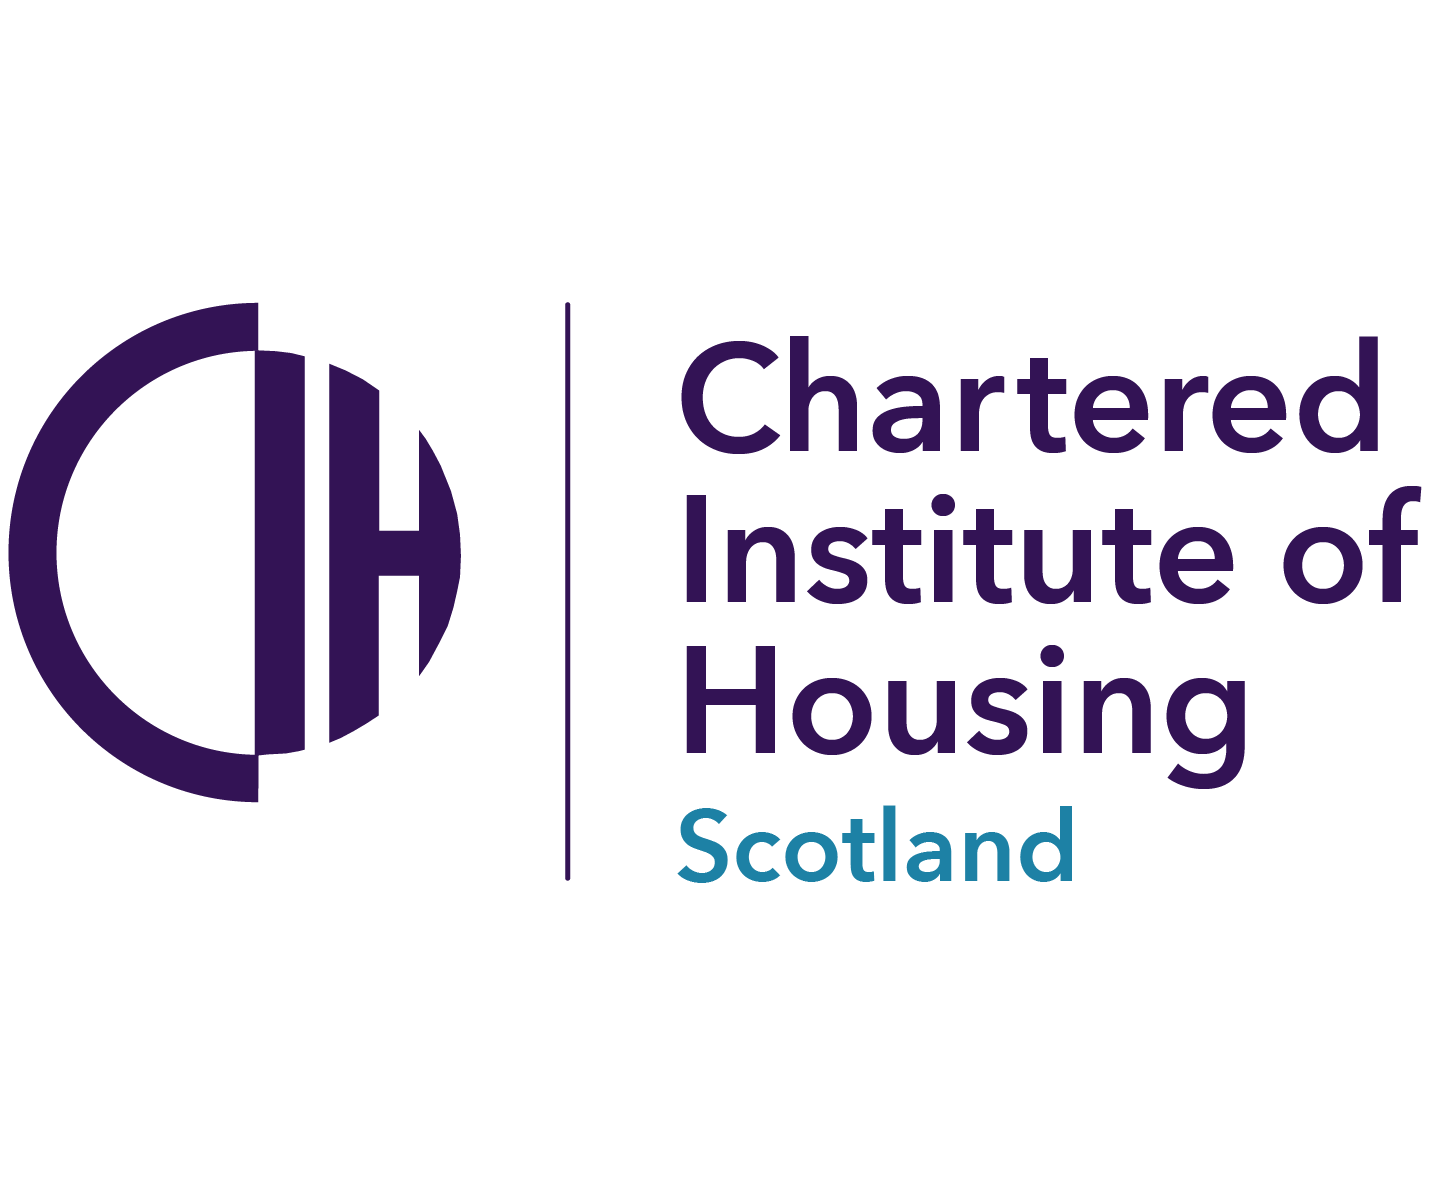 2019 CIH Scotland Excellence Awards now open for applications